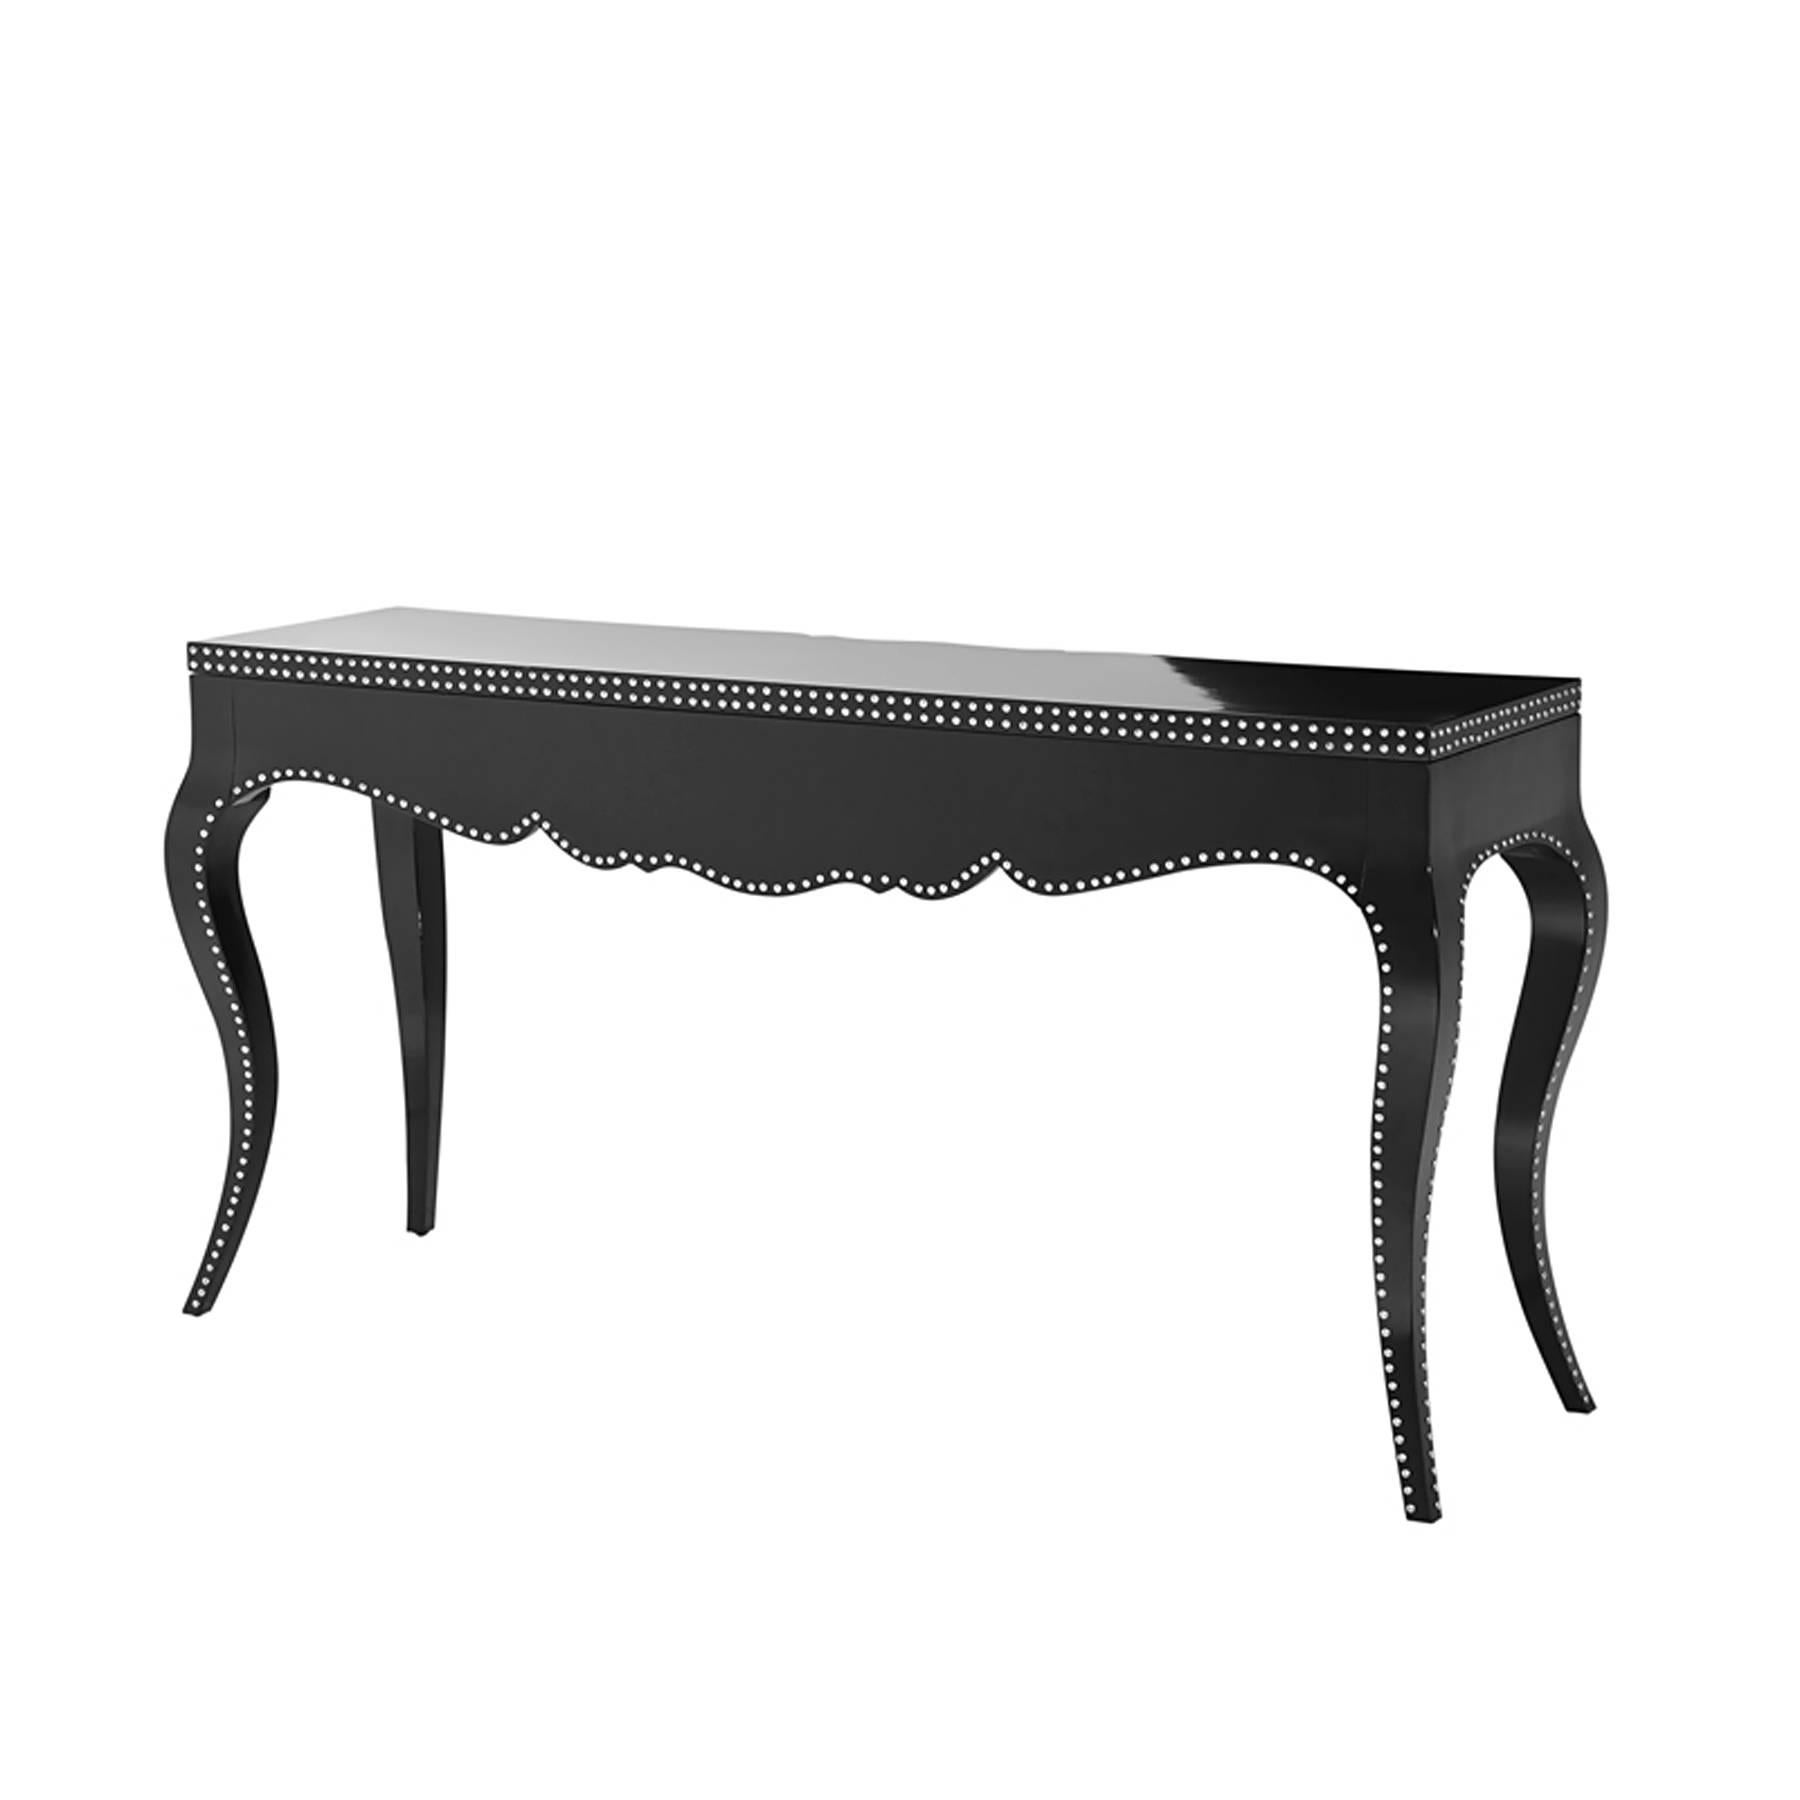 Indonesian Talia Console Table in Black Lacquered Mahogany Wood